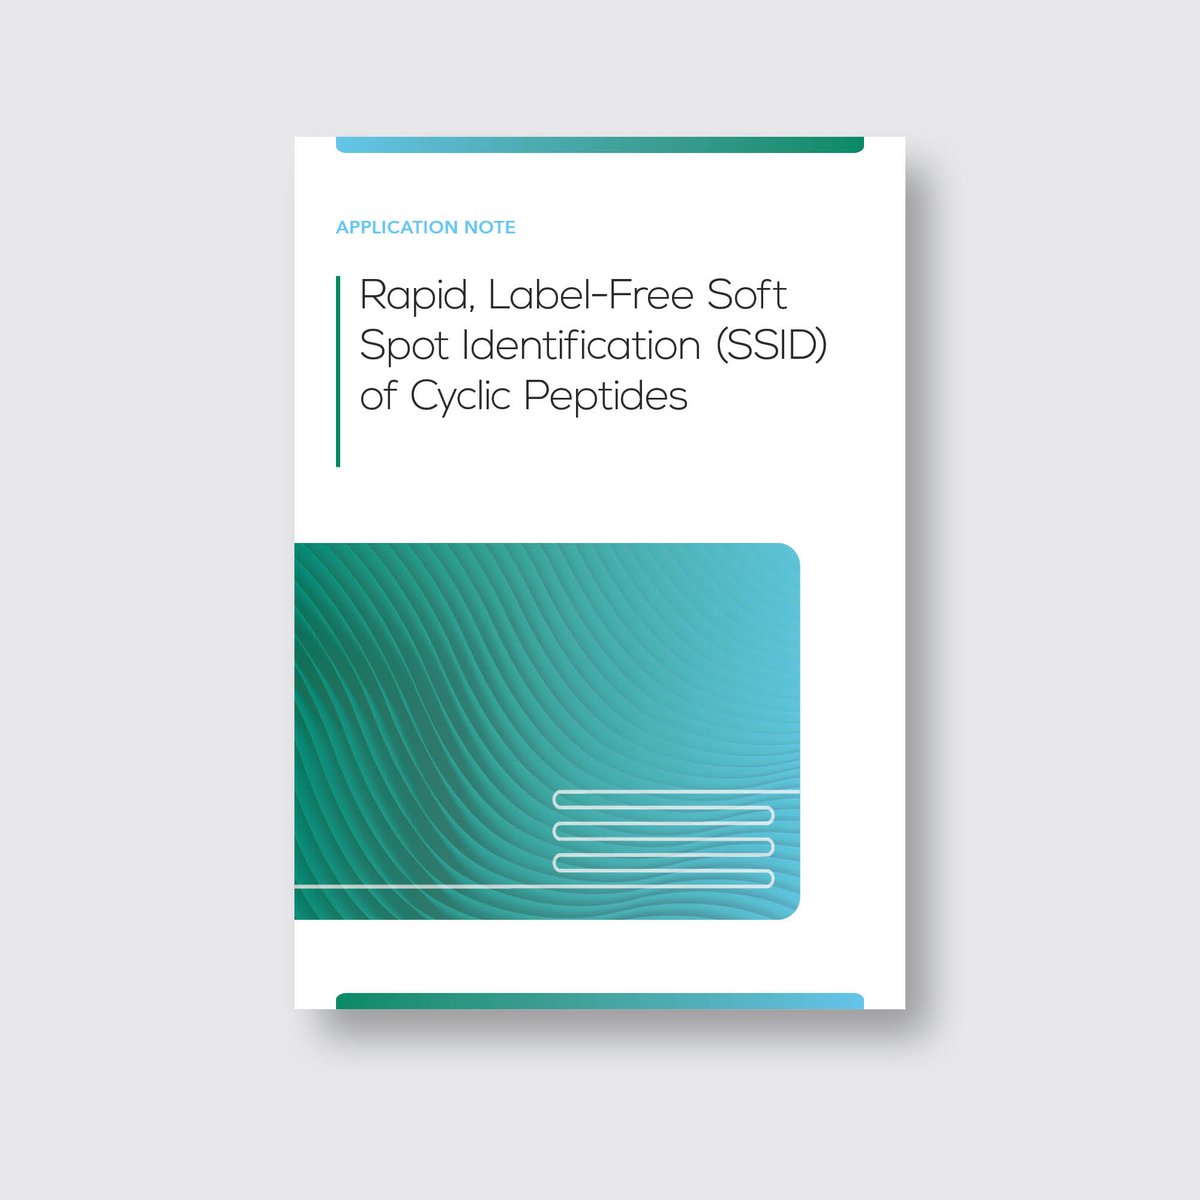 Rapid, Label-Free Soft Spot Identification (SSID) of Cyclic Peptides_App Note Thumbnail-1